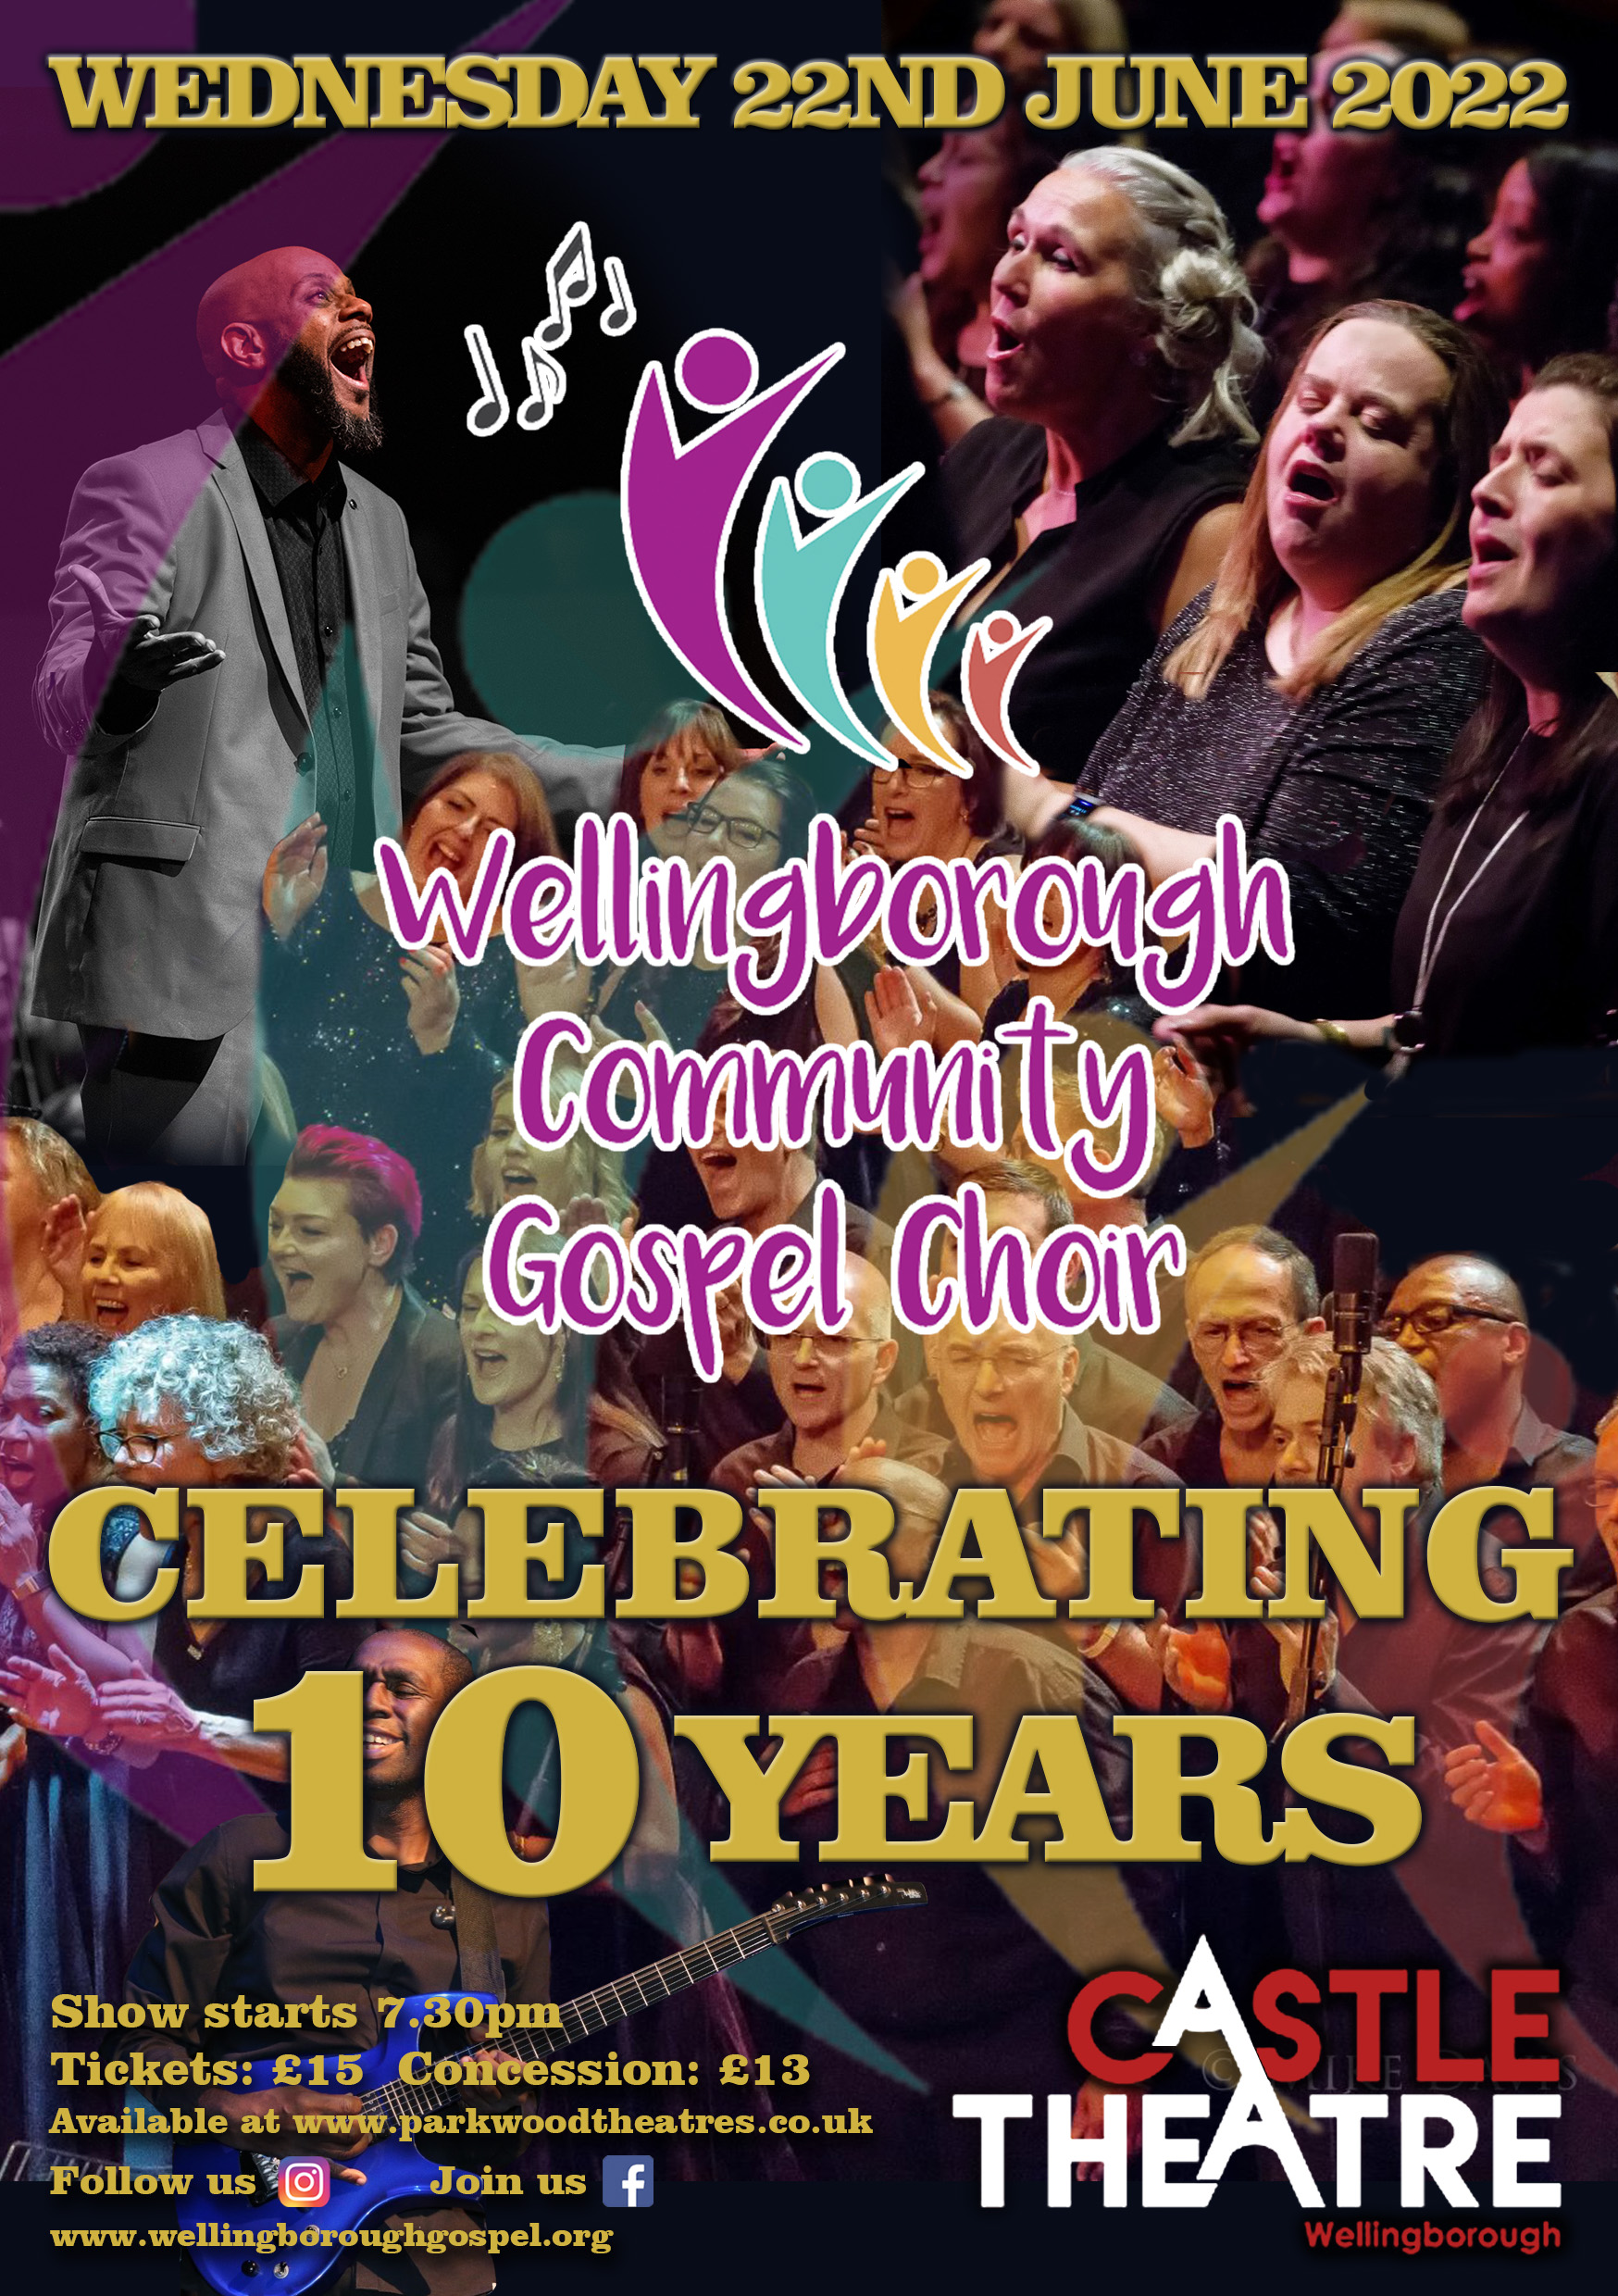 You are currently viewing 10 year Anniversary Concert, The Castle Theatre, Wednesday 22nd June 2022